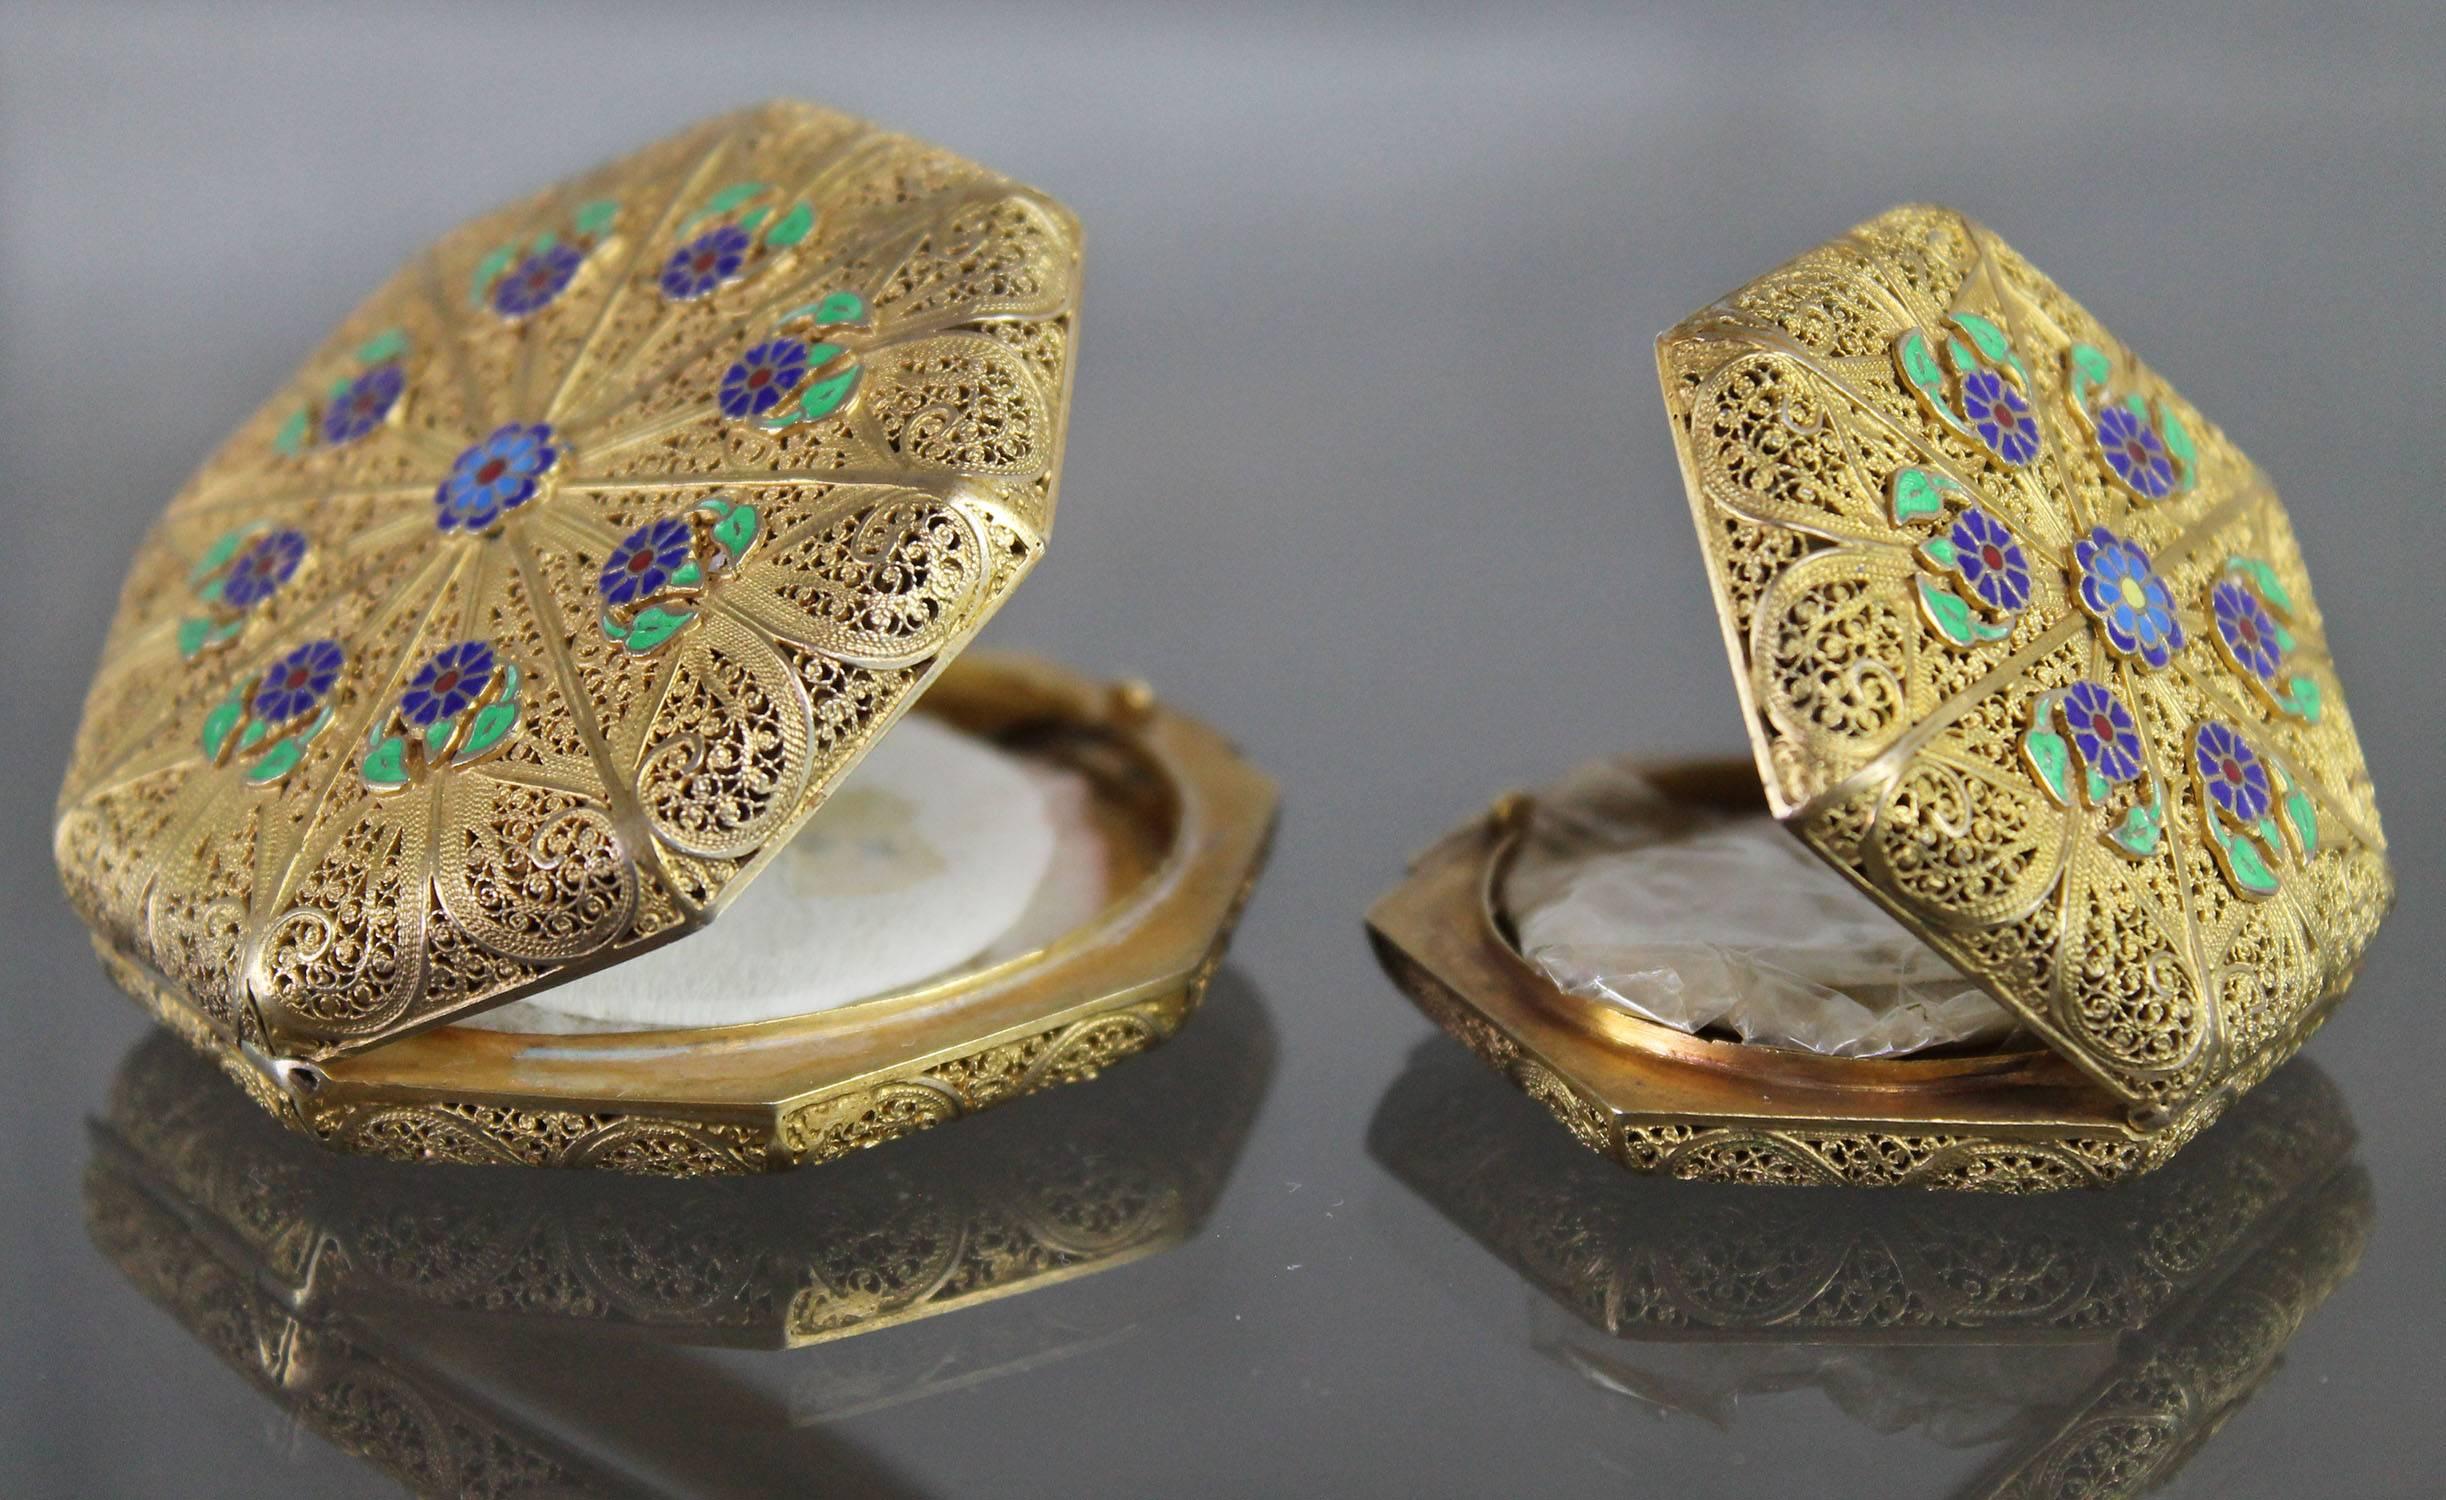 20th Century Pair of Octagon Compacts Vermeil Filigree Hallmarked & Enameled Flower Applique